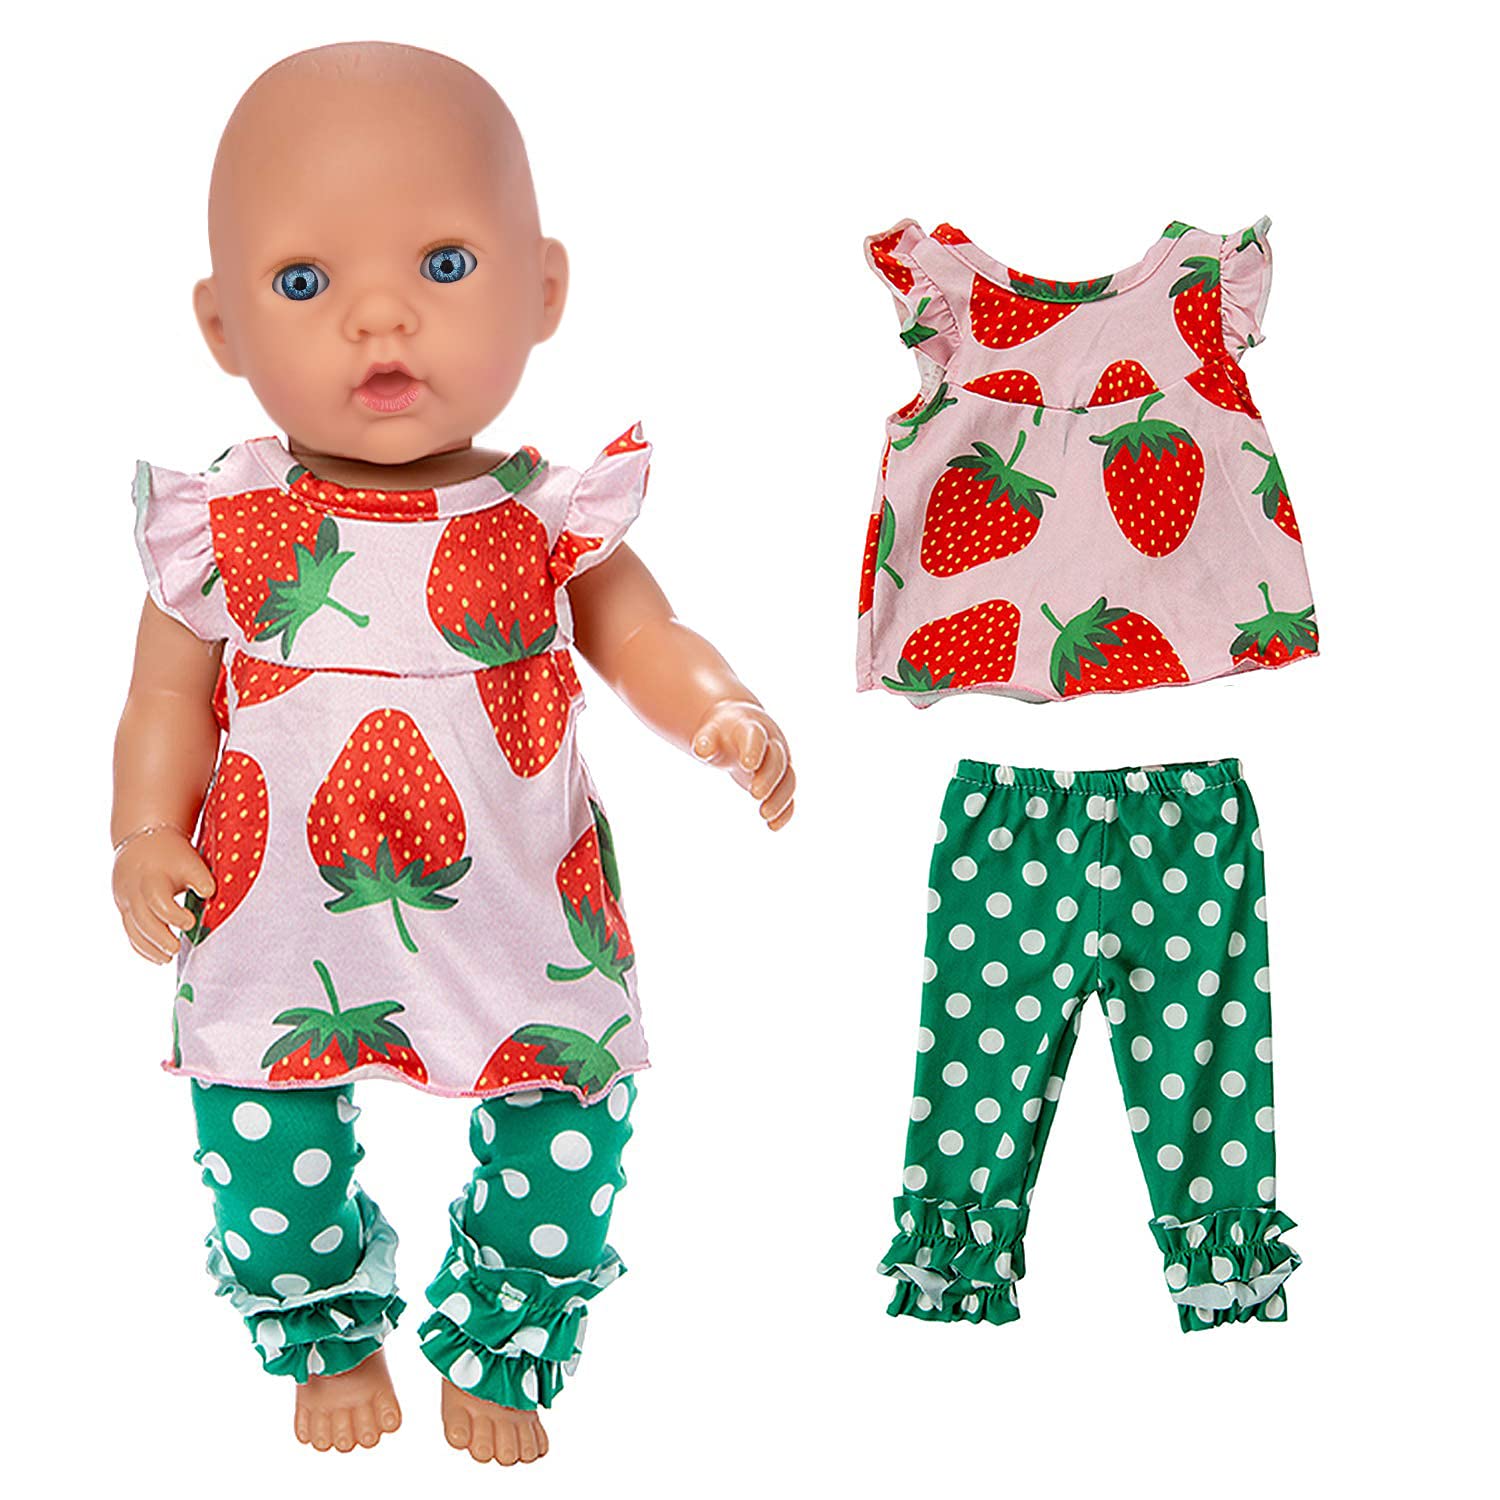 Ecore Fun 10 Item 14-16 Inch Baby Doll Clothes Dresses Outfits Pjs for 43cm New Born Baby Dolls, 15 Inch Baby Doll, American 18 Inch Girl Doll